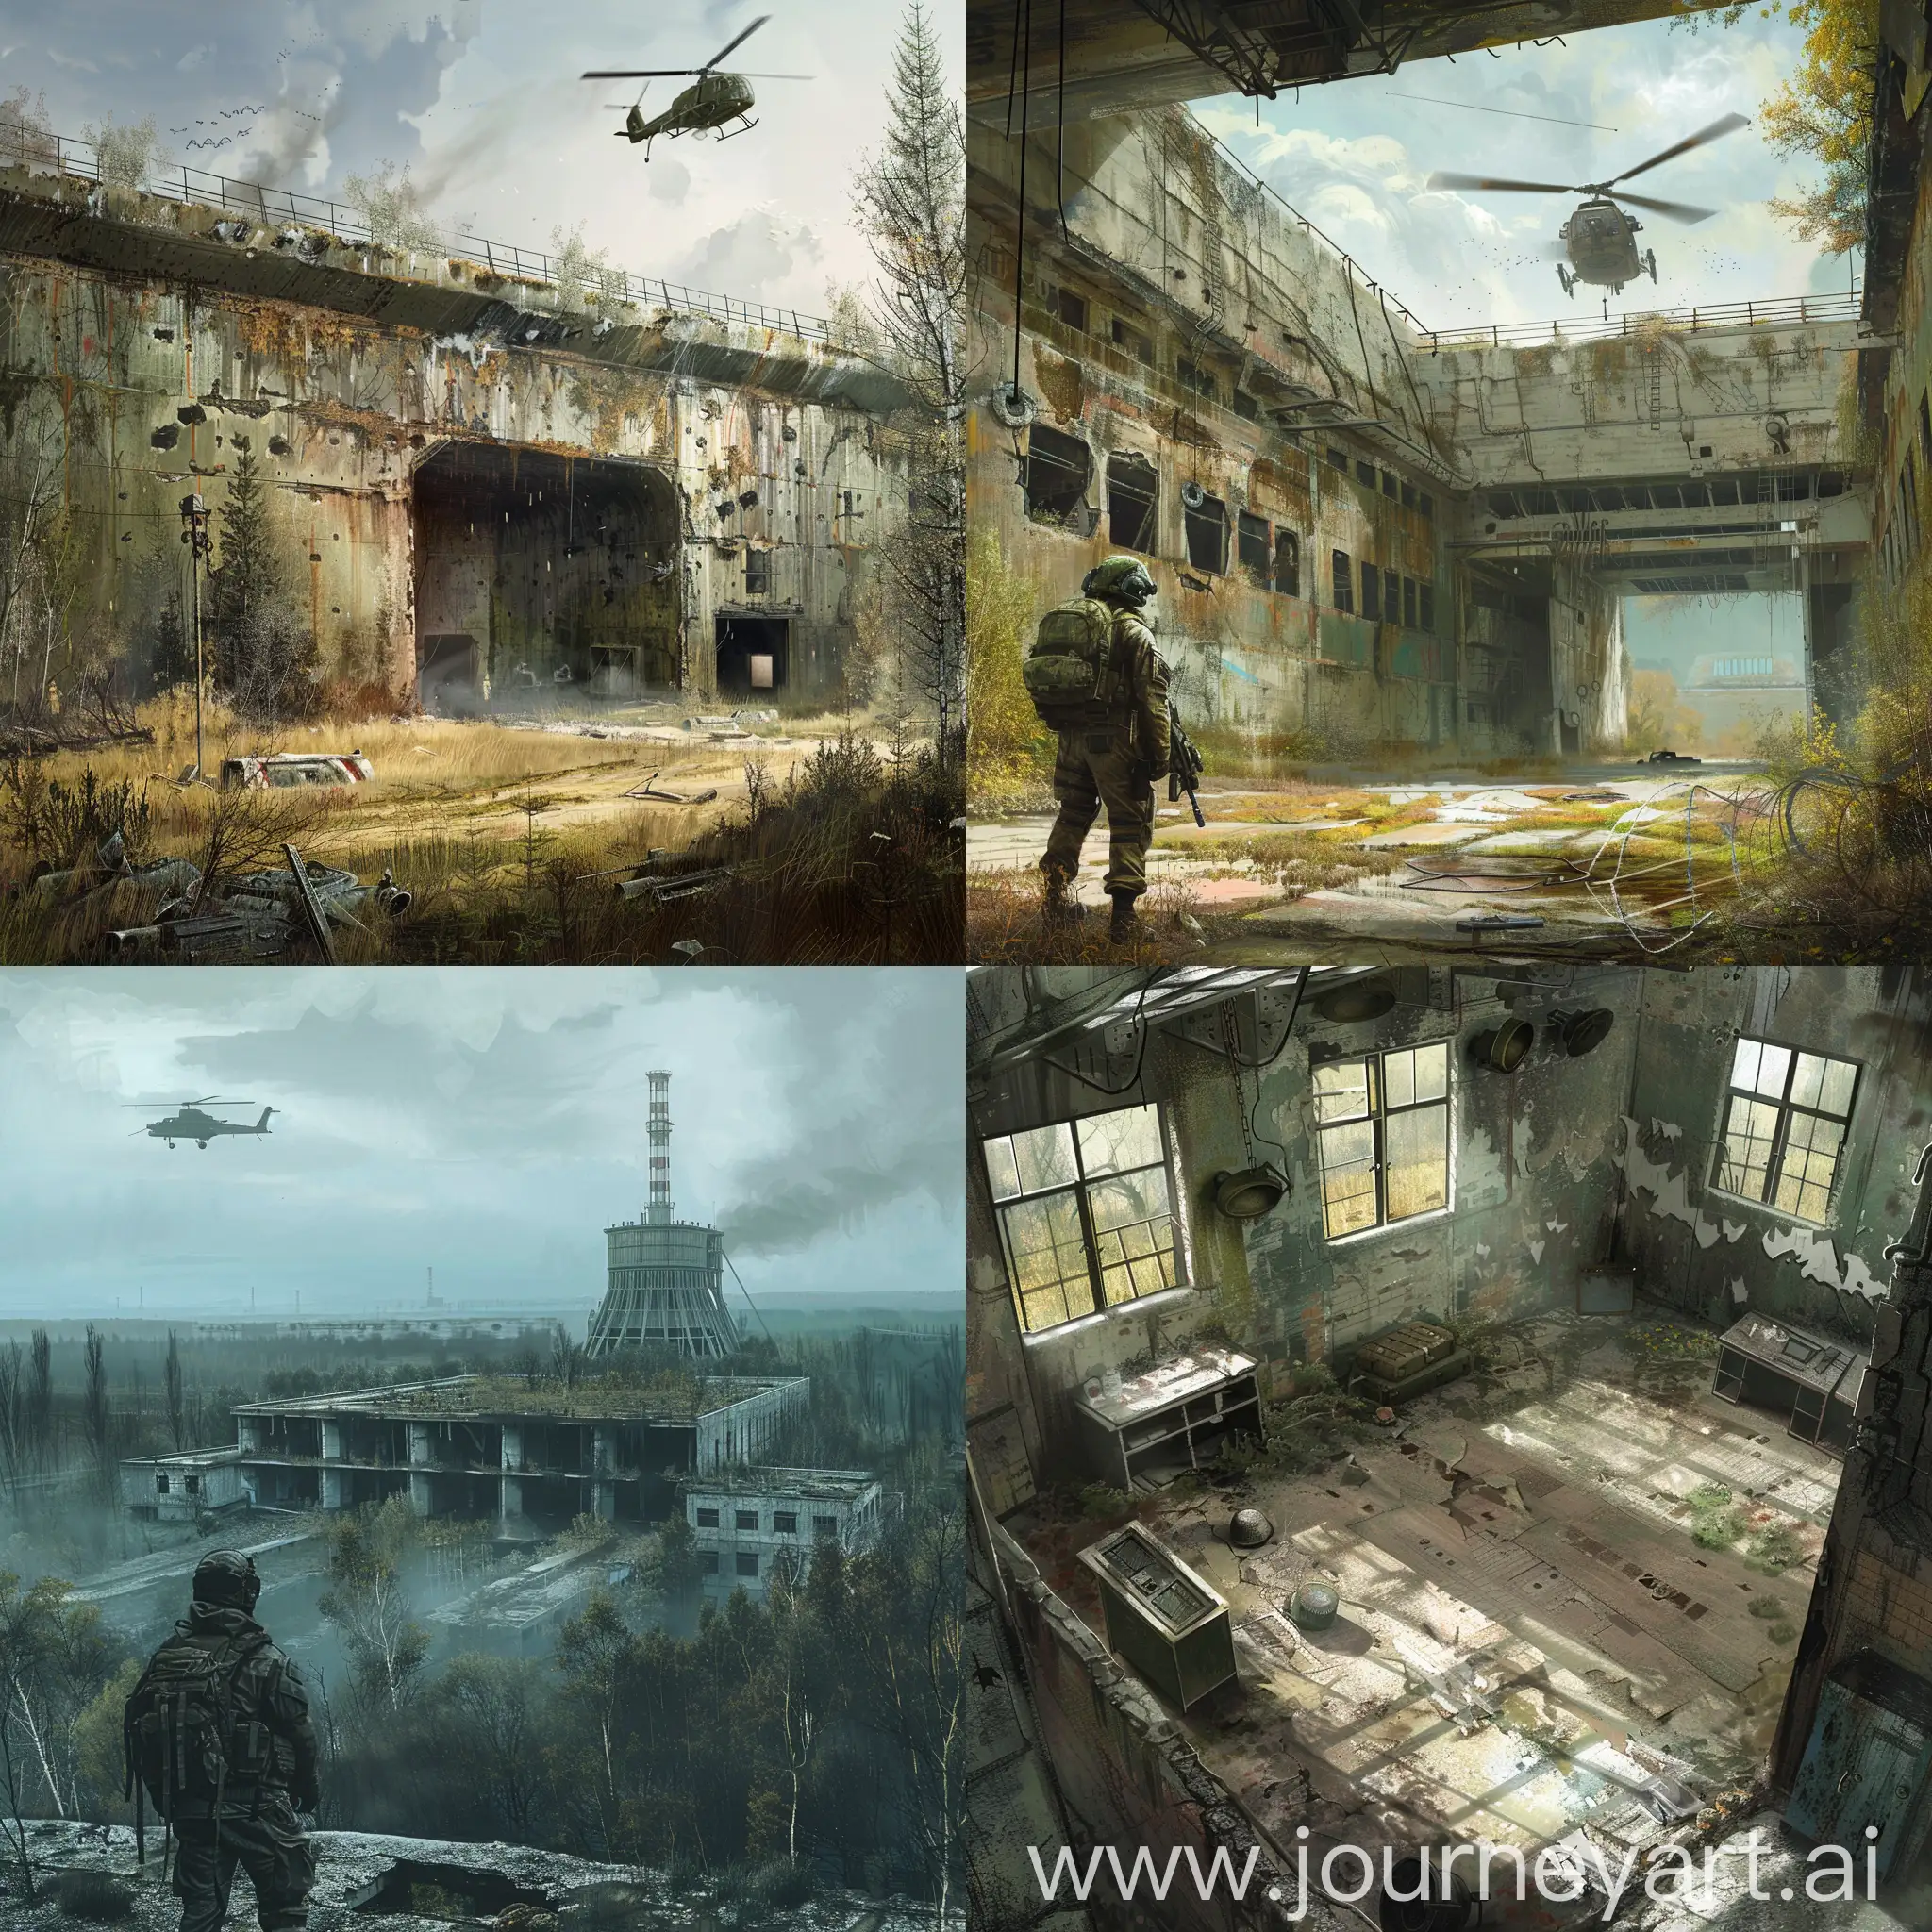 Concept-Art-Small-Military-Base-in-Abandoned-Chernobyl-Zone